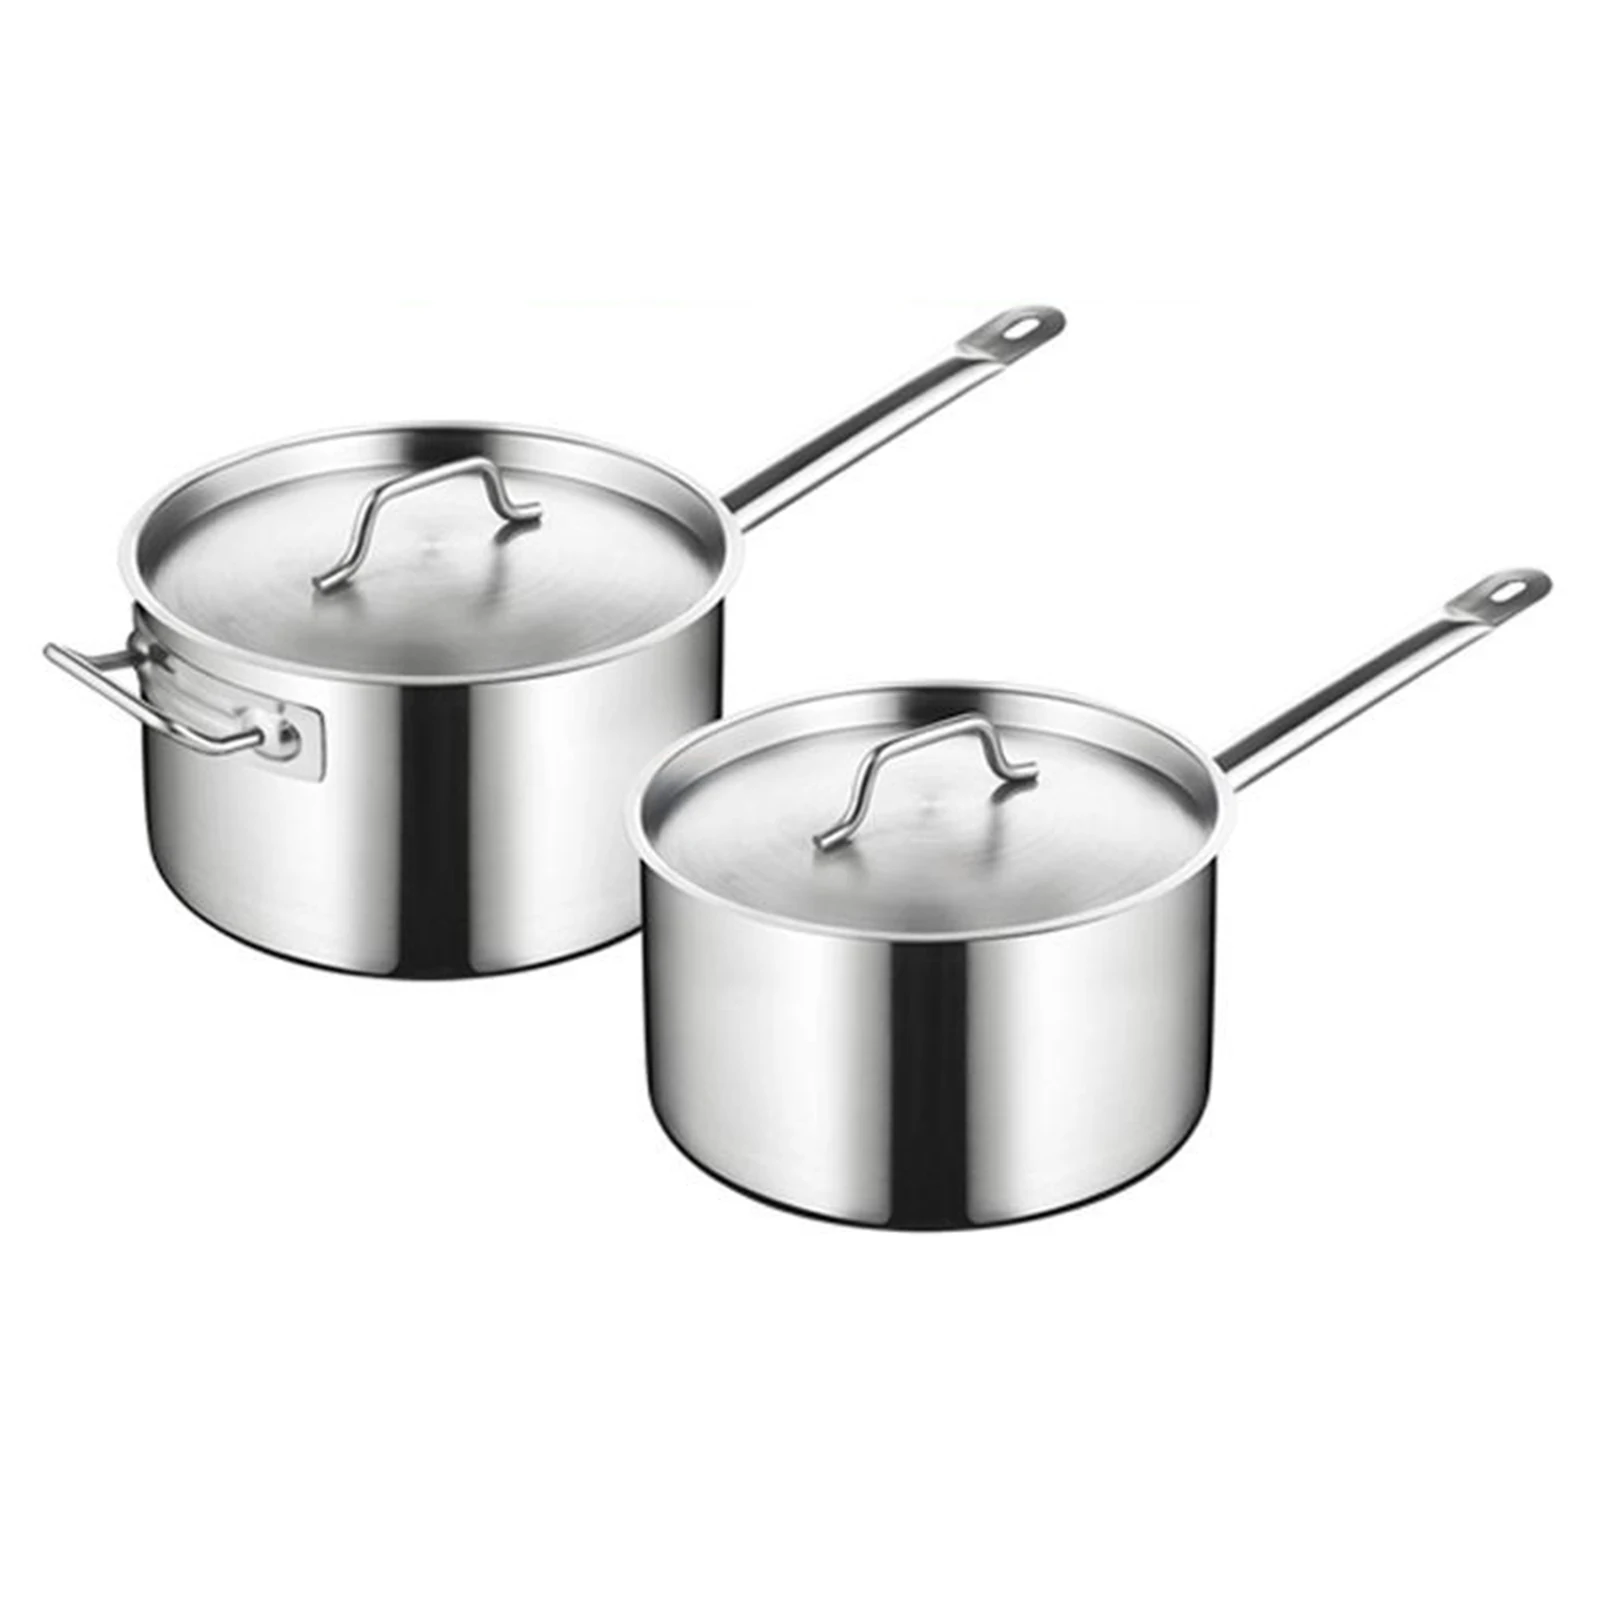 https://ae01.alicdn.com/kf/S1c6417b3a0f841ed976458961e24fae2O/Pot-Saucepan-Pan-Milk-Sauce-Cooking-Soup-Oil-Pots-Pasta-Soup-with-Cover-Stainless-Steel-Cooking.jpg